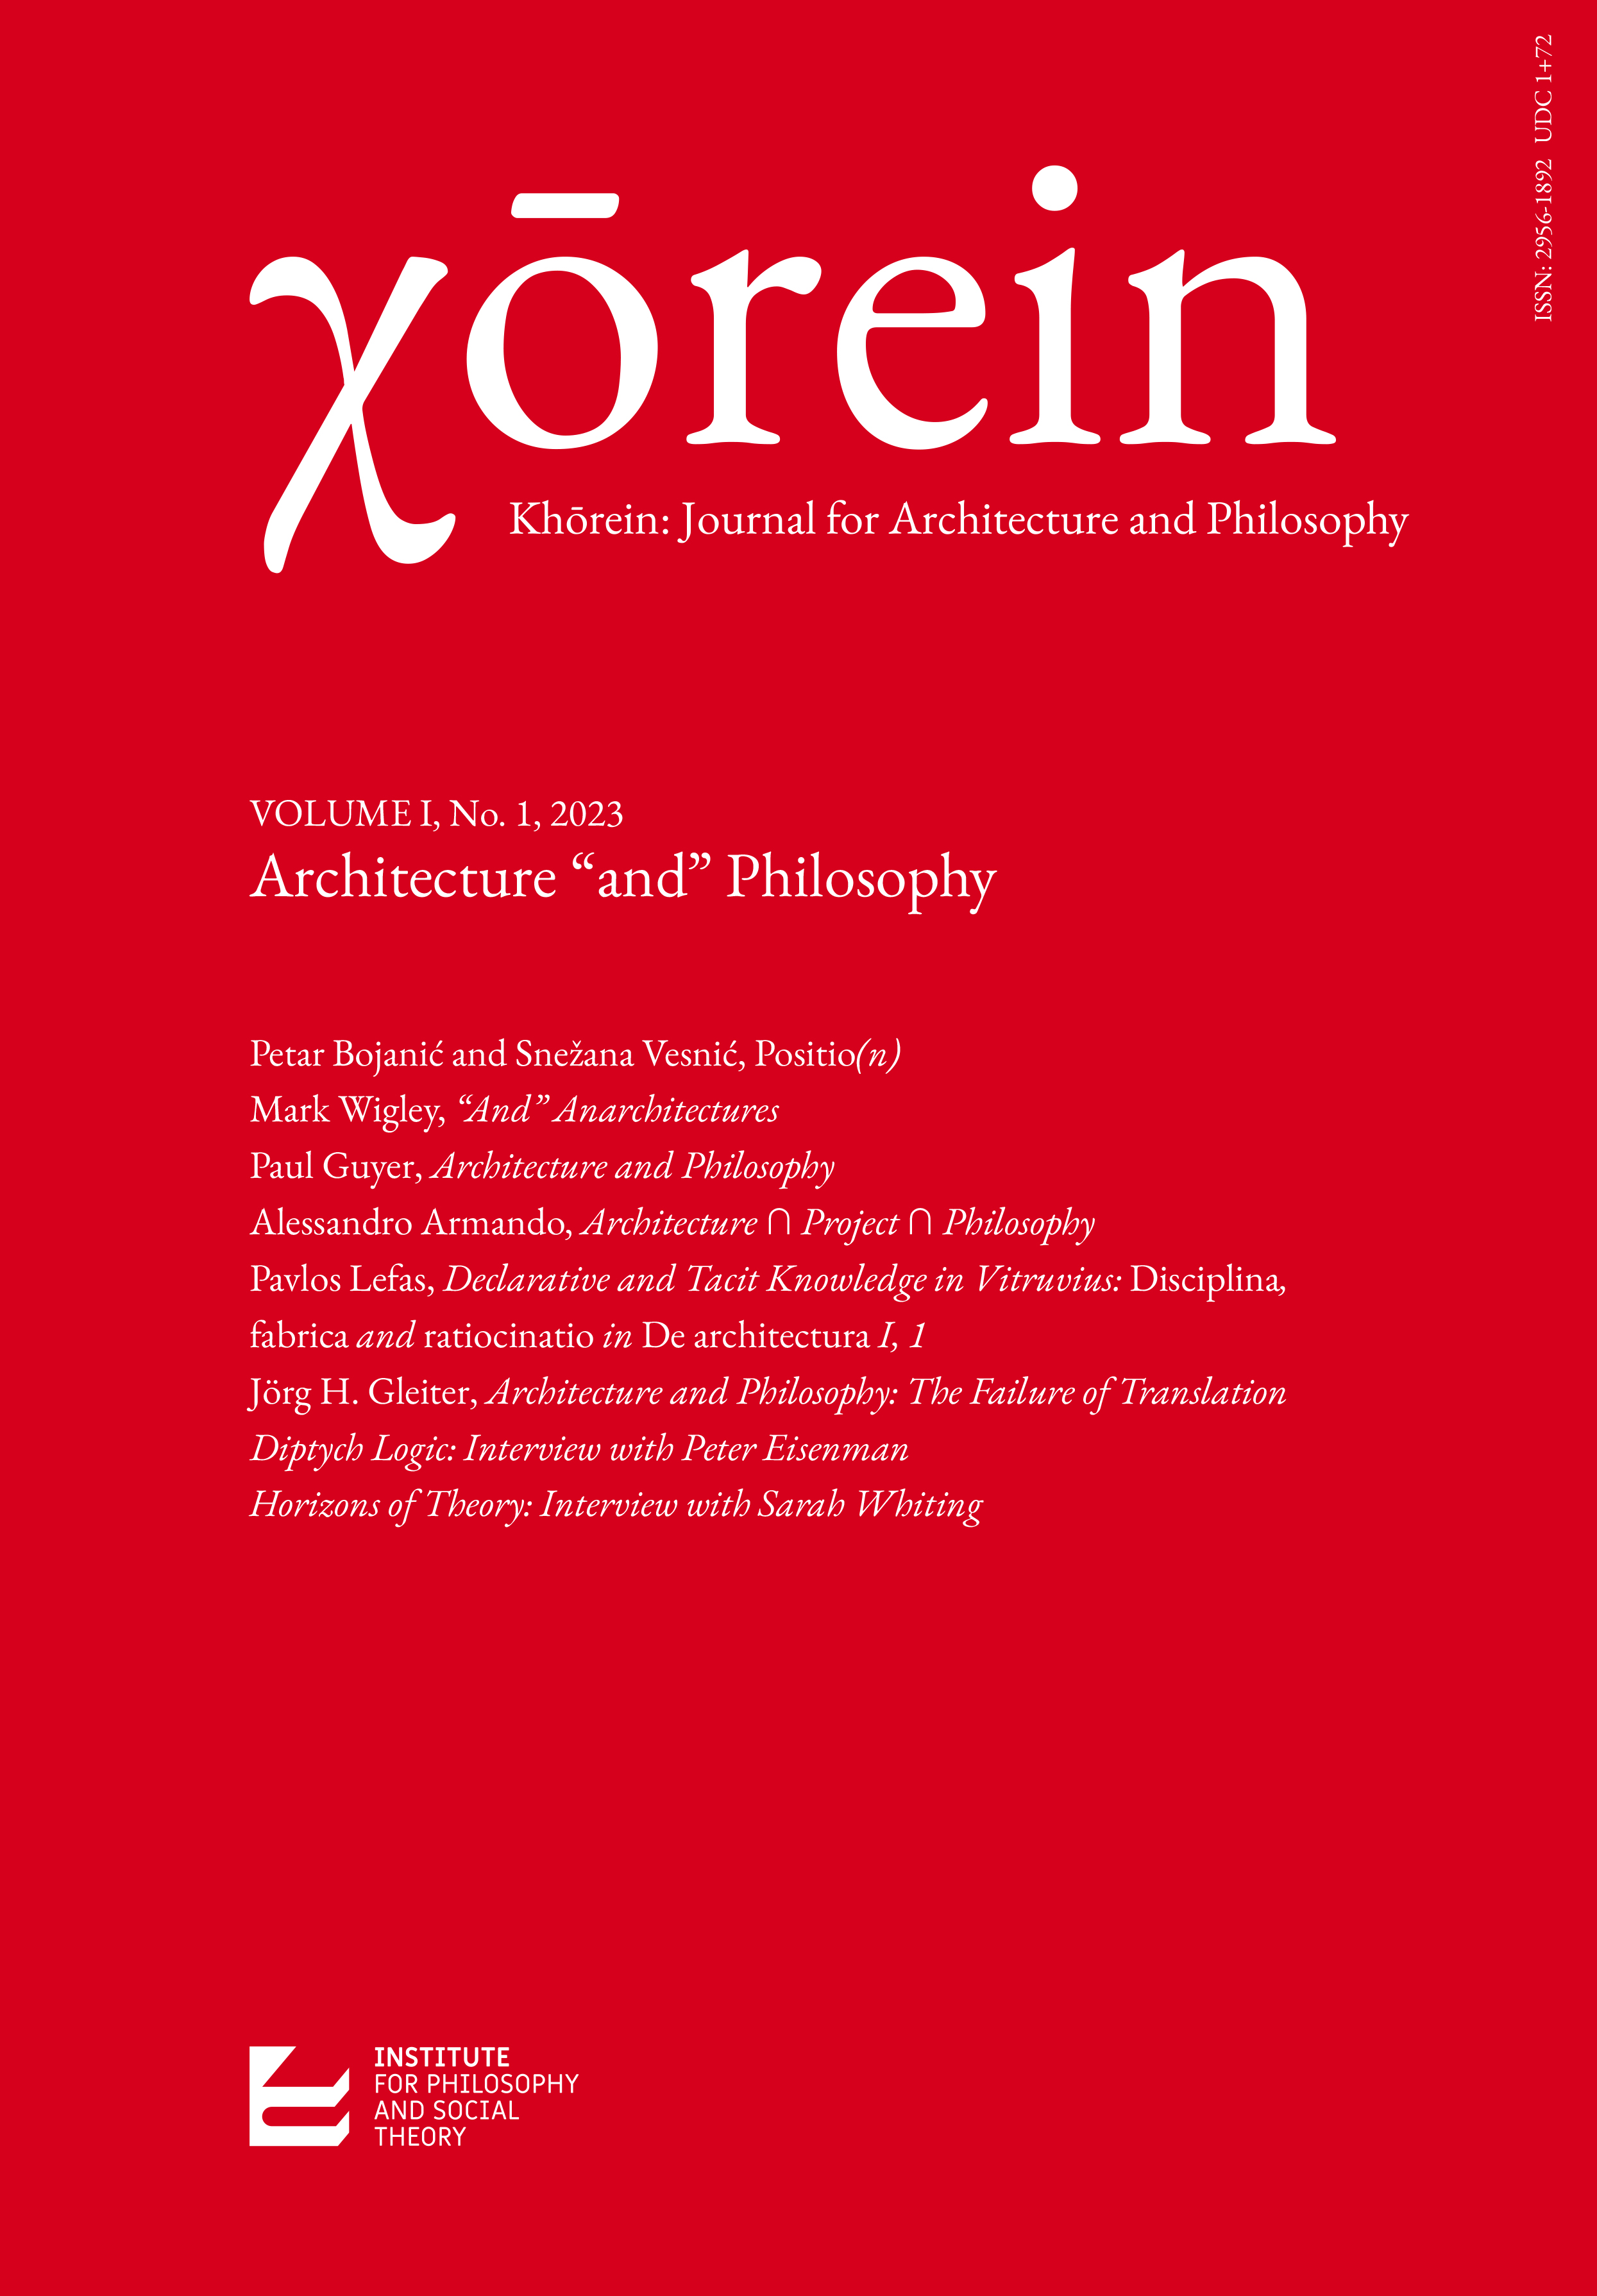 “And” Anarchitectures Cover Image